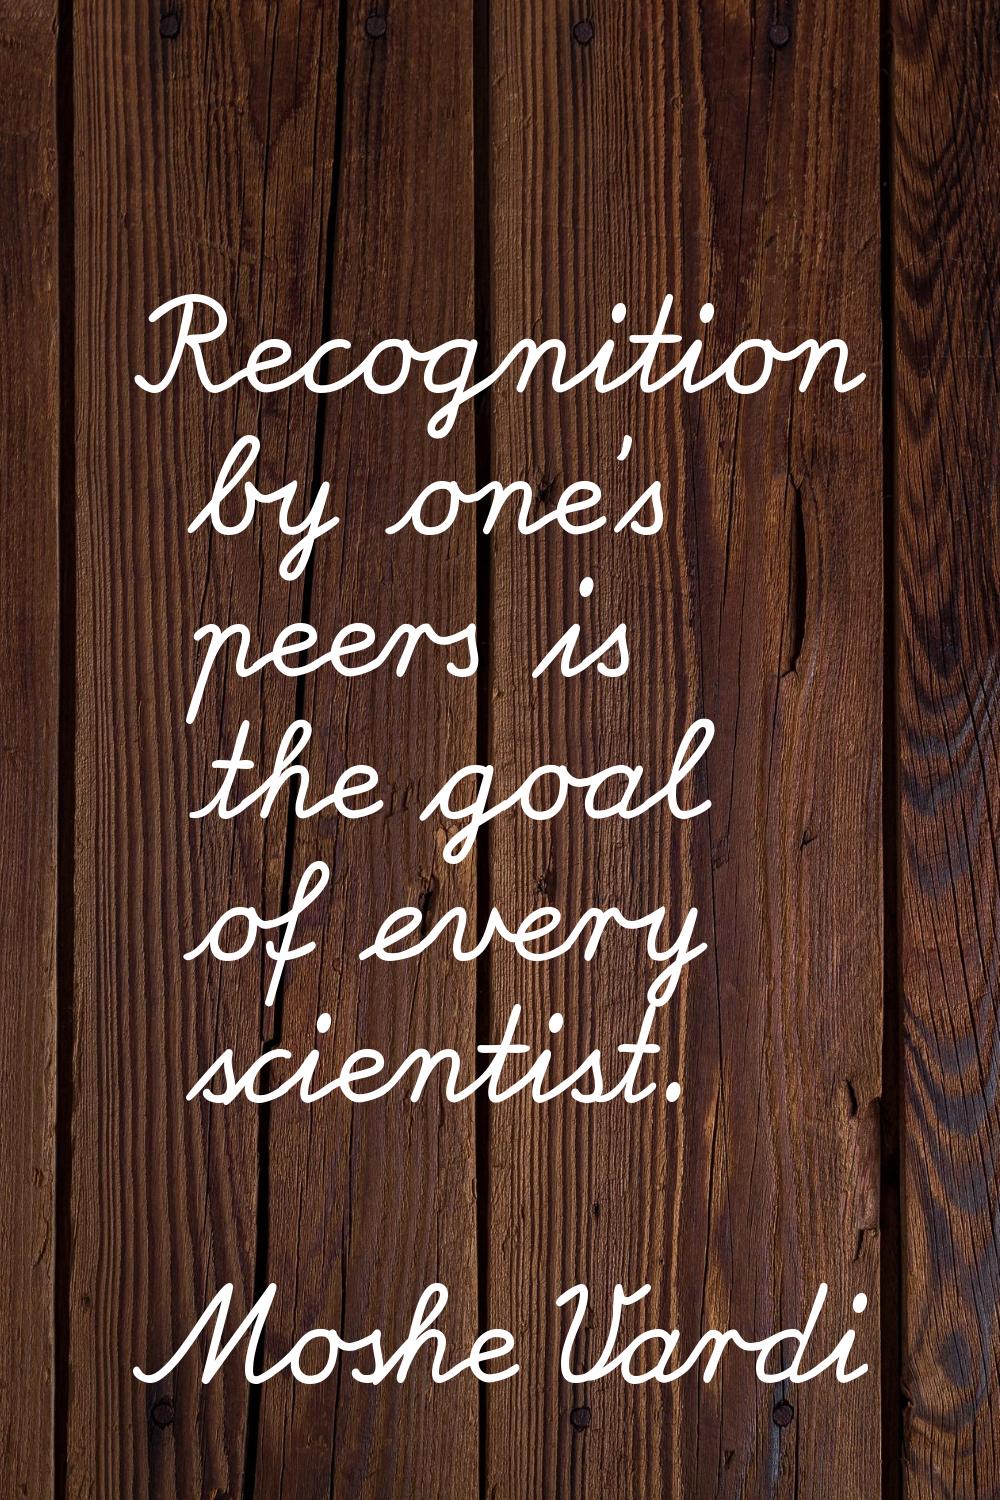 Recognition by one's peers is the goal of every scientist.